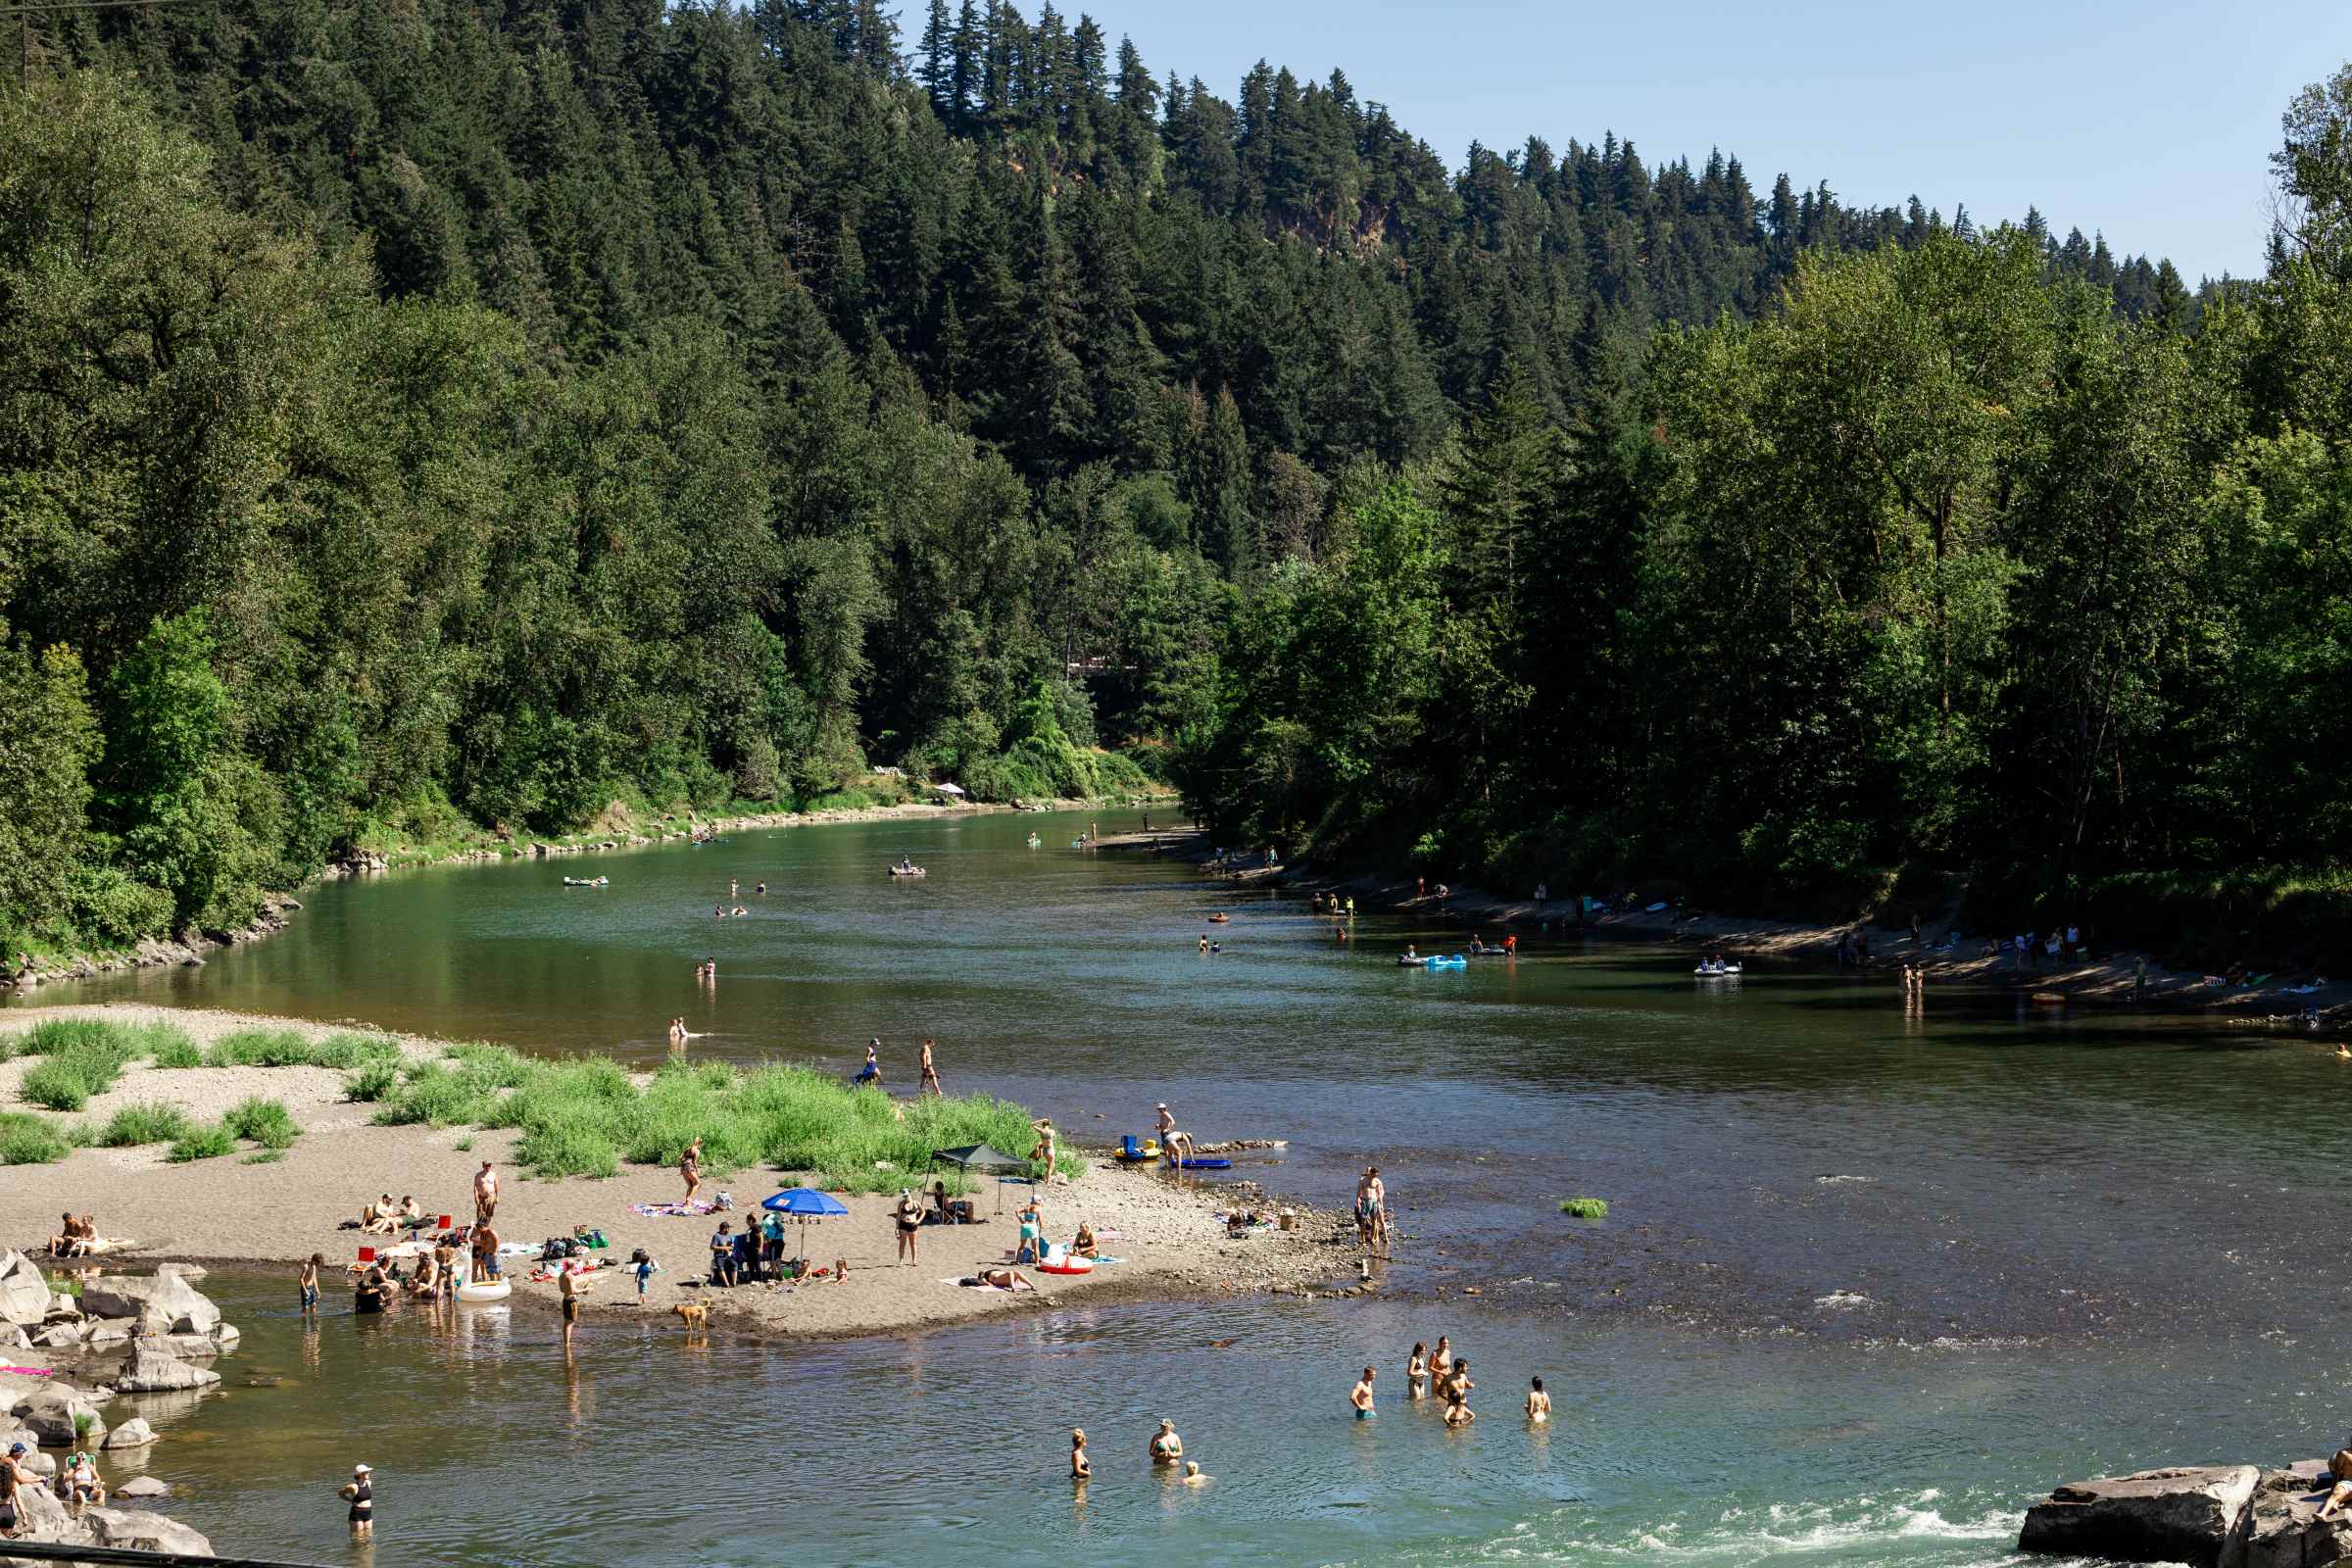 People enjoy water activities on the Sandy River at Glenn Otto Park in Troutdale